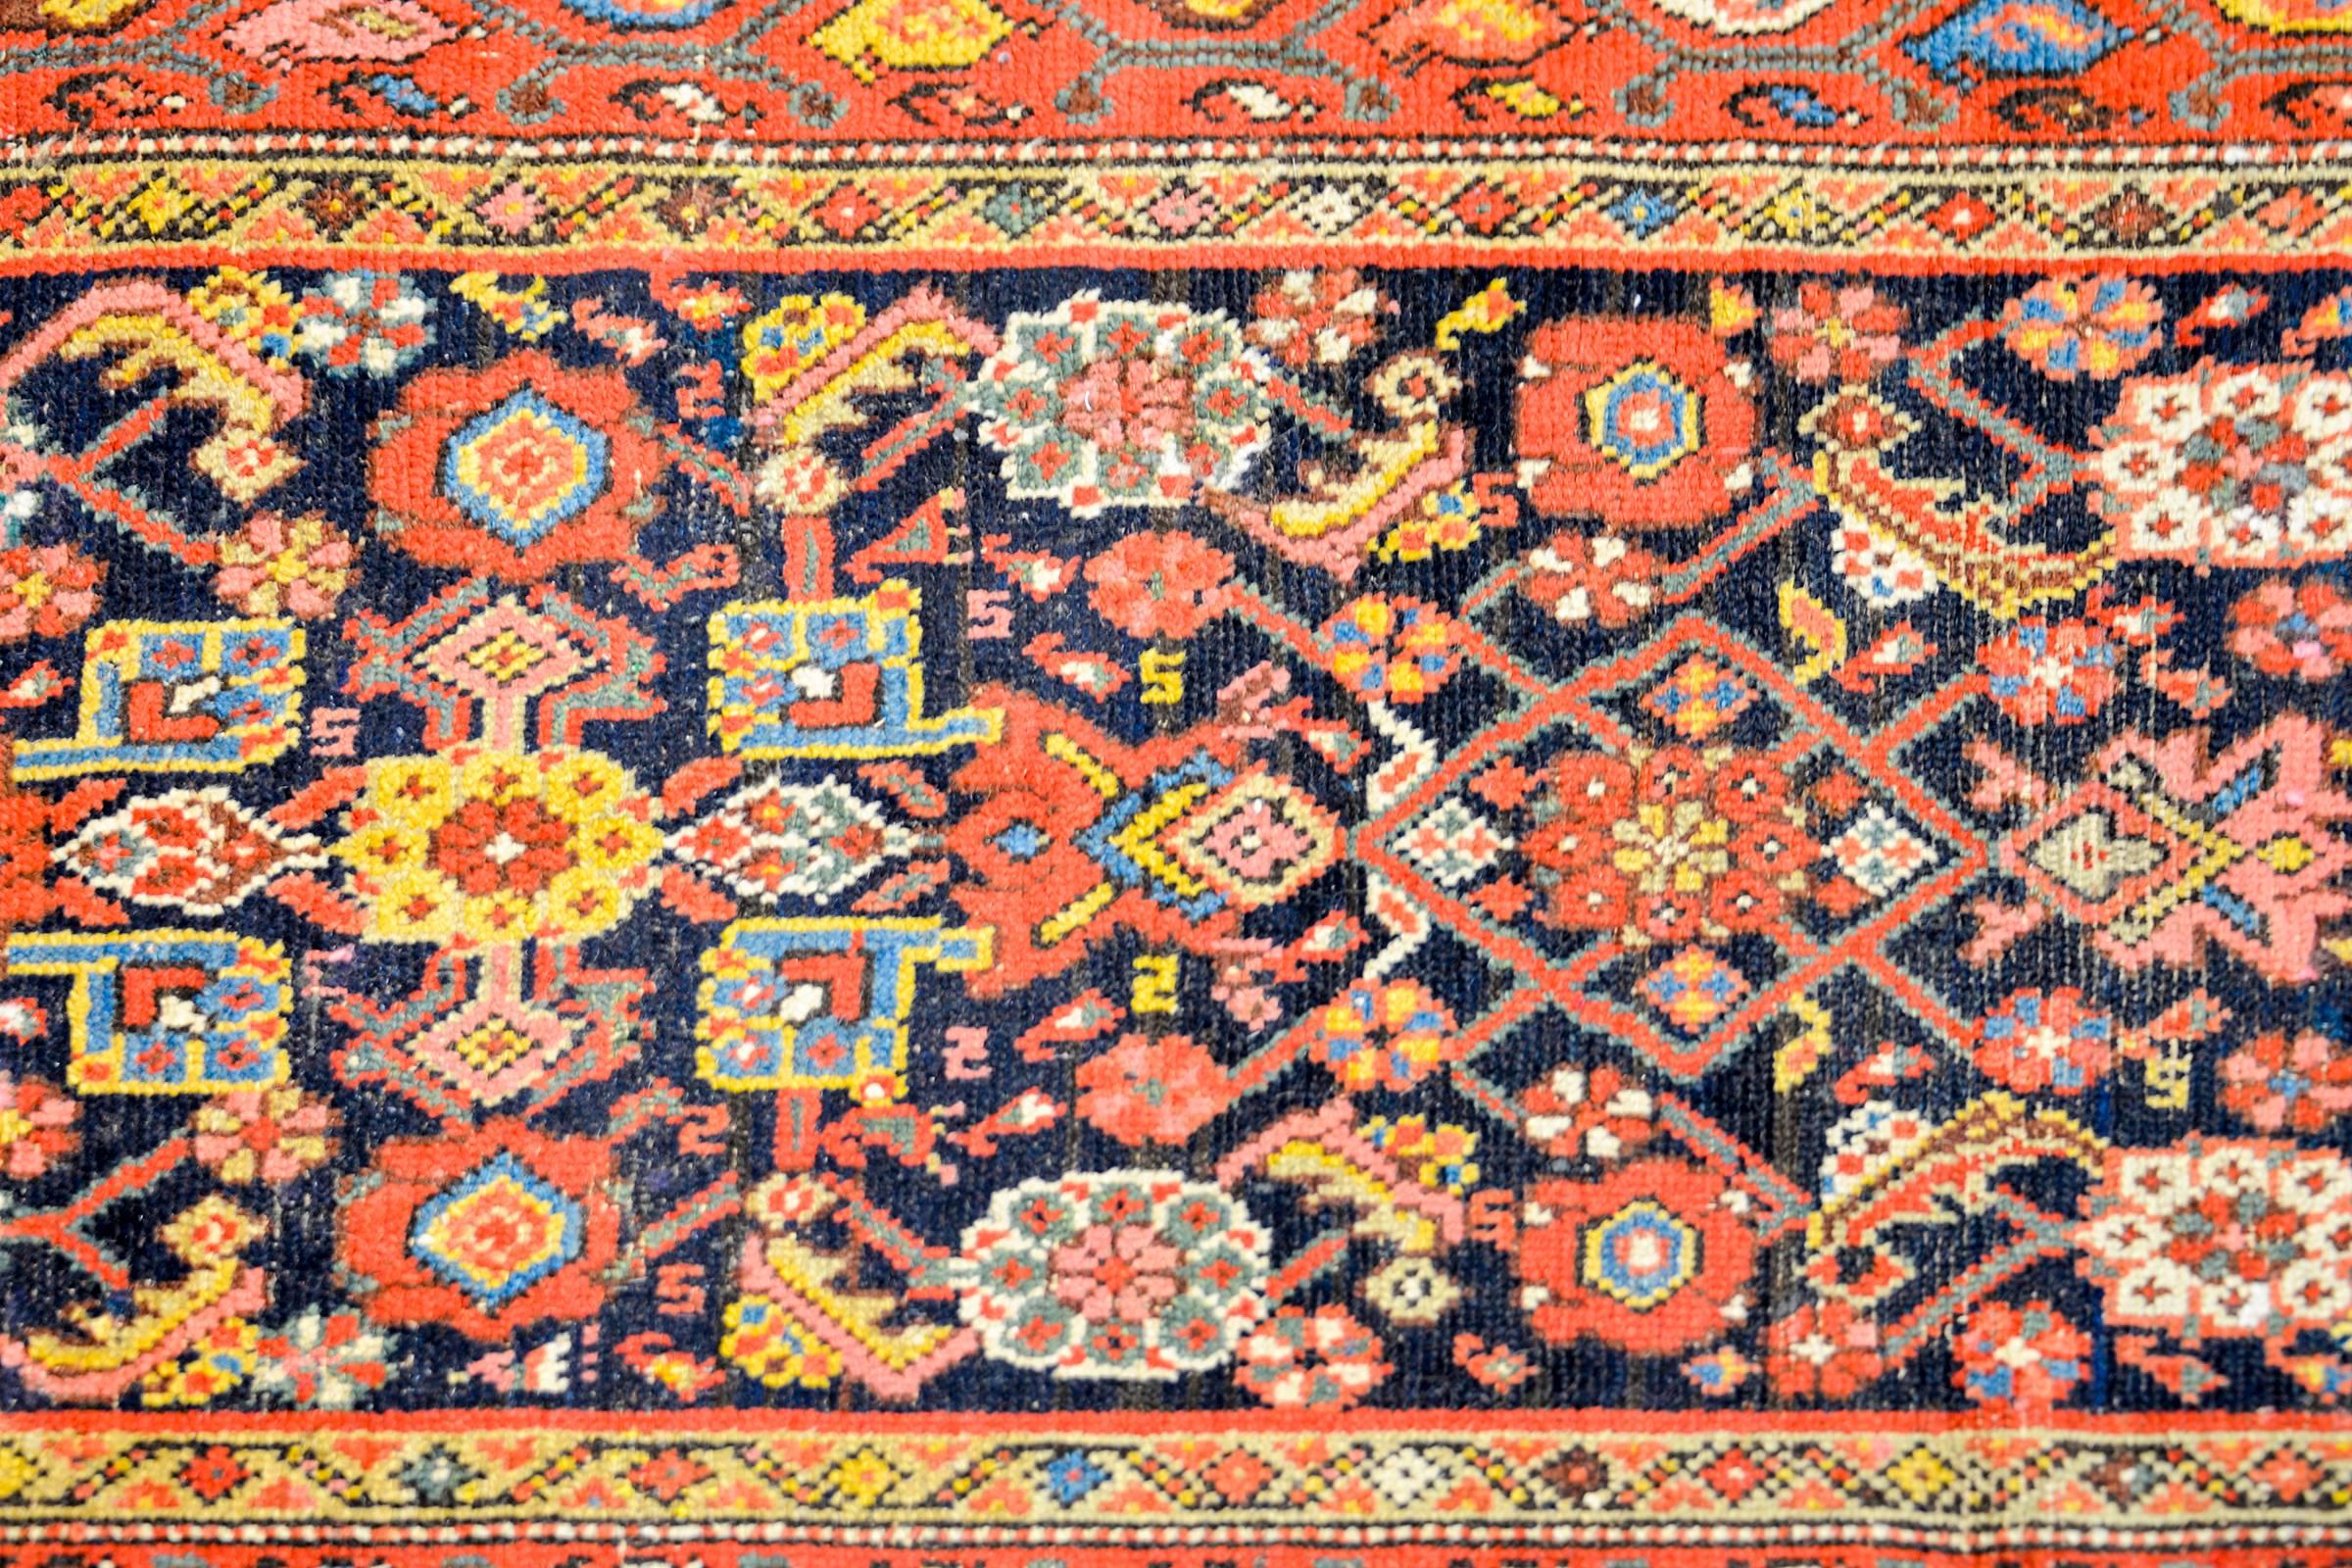 A wonderful early 20th century Persian Malayer runner with all-over multicolored trellised floral and vine pattern woven in indigo, crimson, gold, and cream colored wool, on a dark indigo background. The border is composed of four distinct patterns,